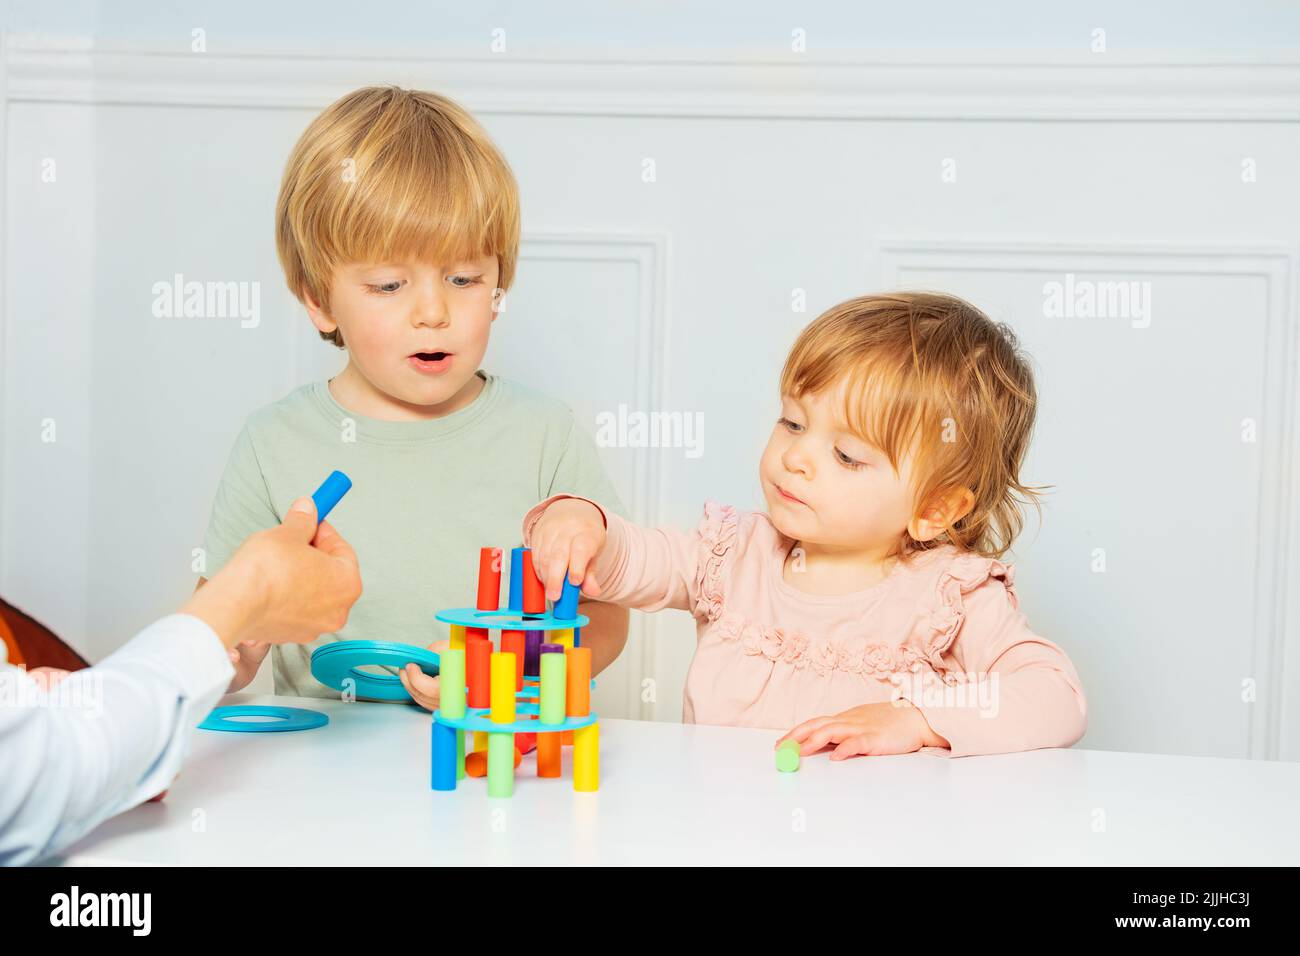 Cute boy and girl build with help of adult tower on the table Stock Photo